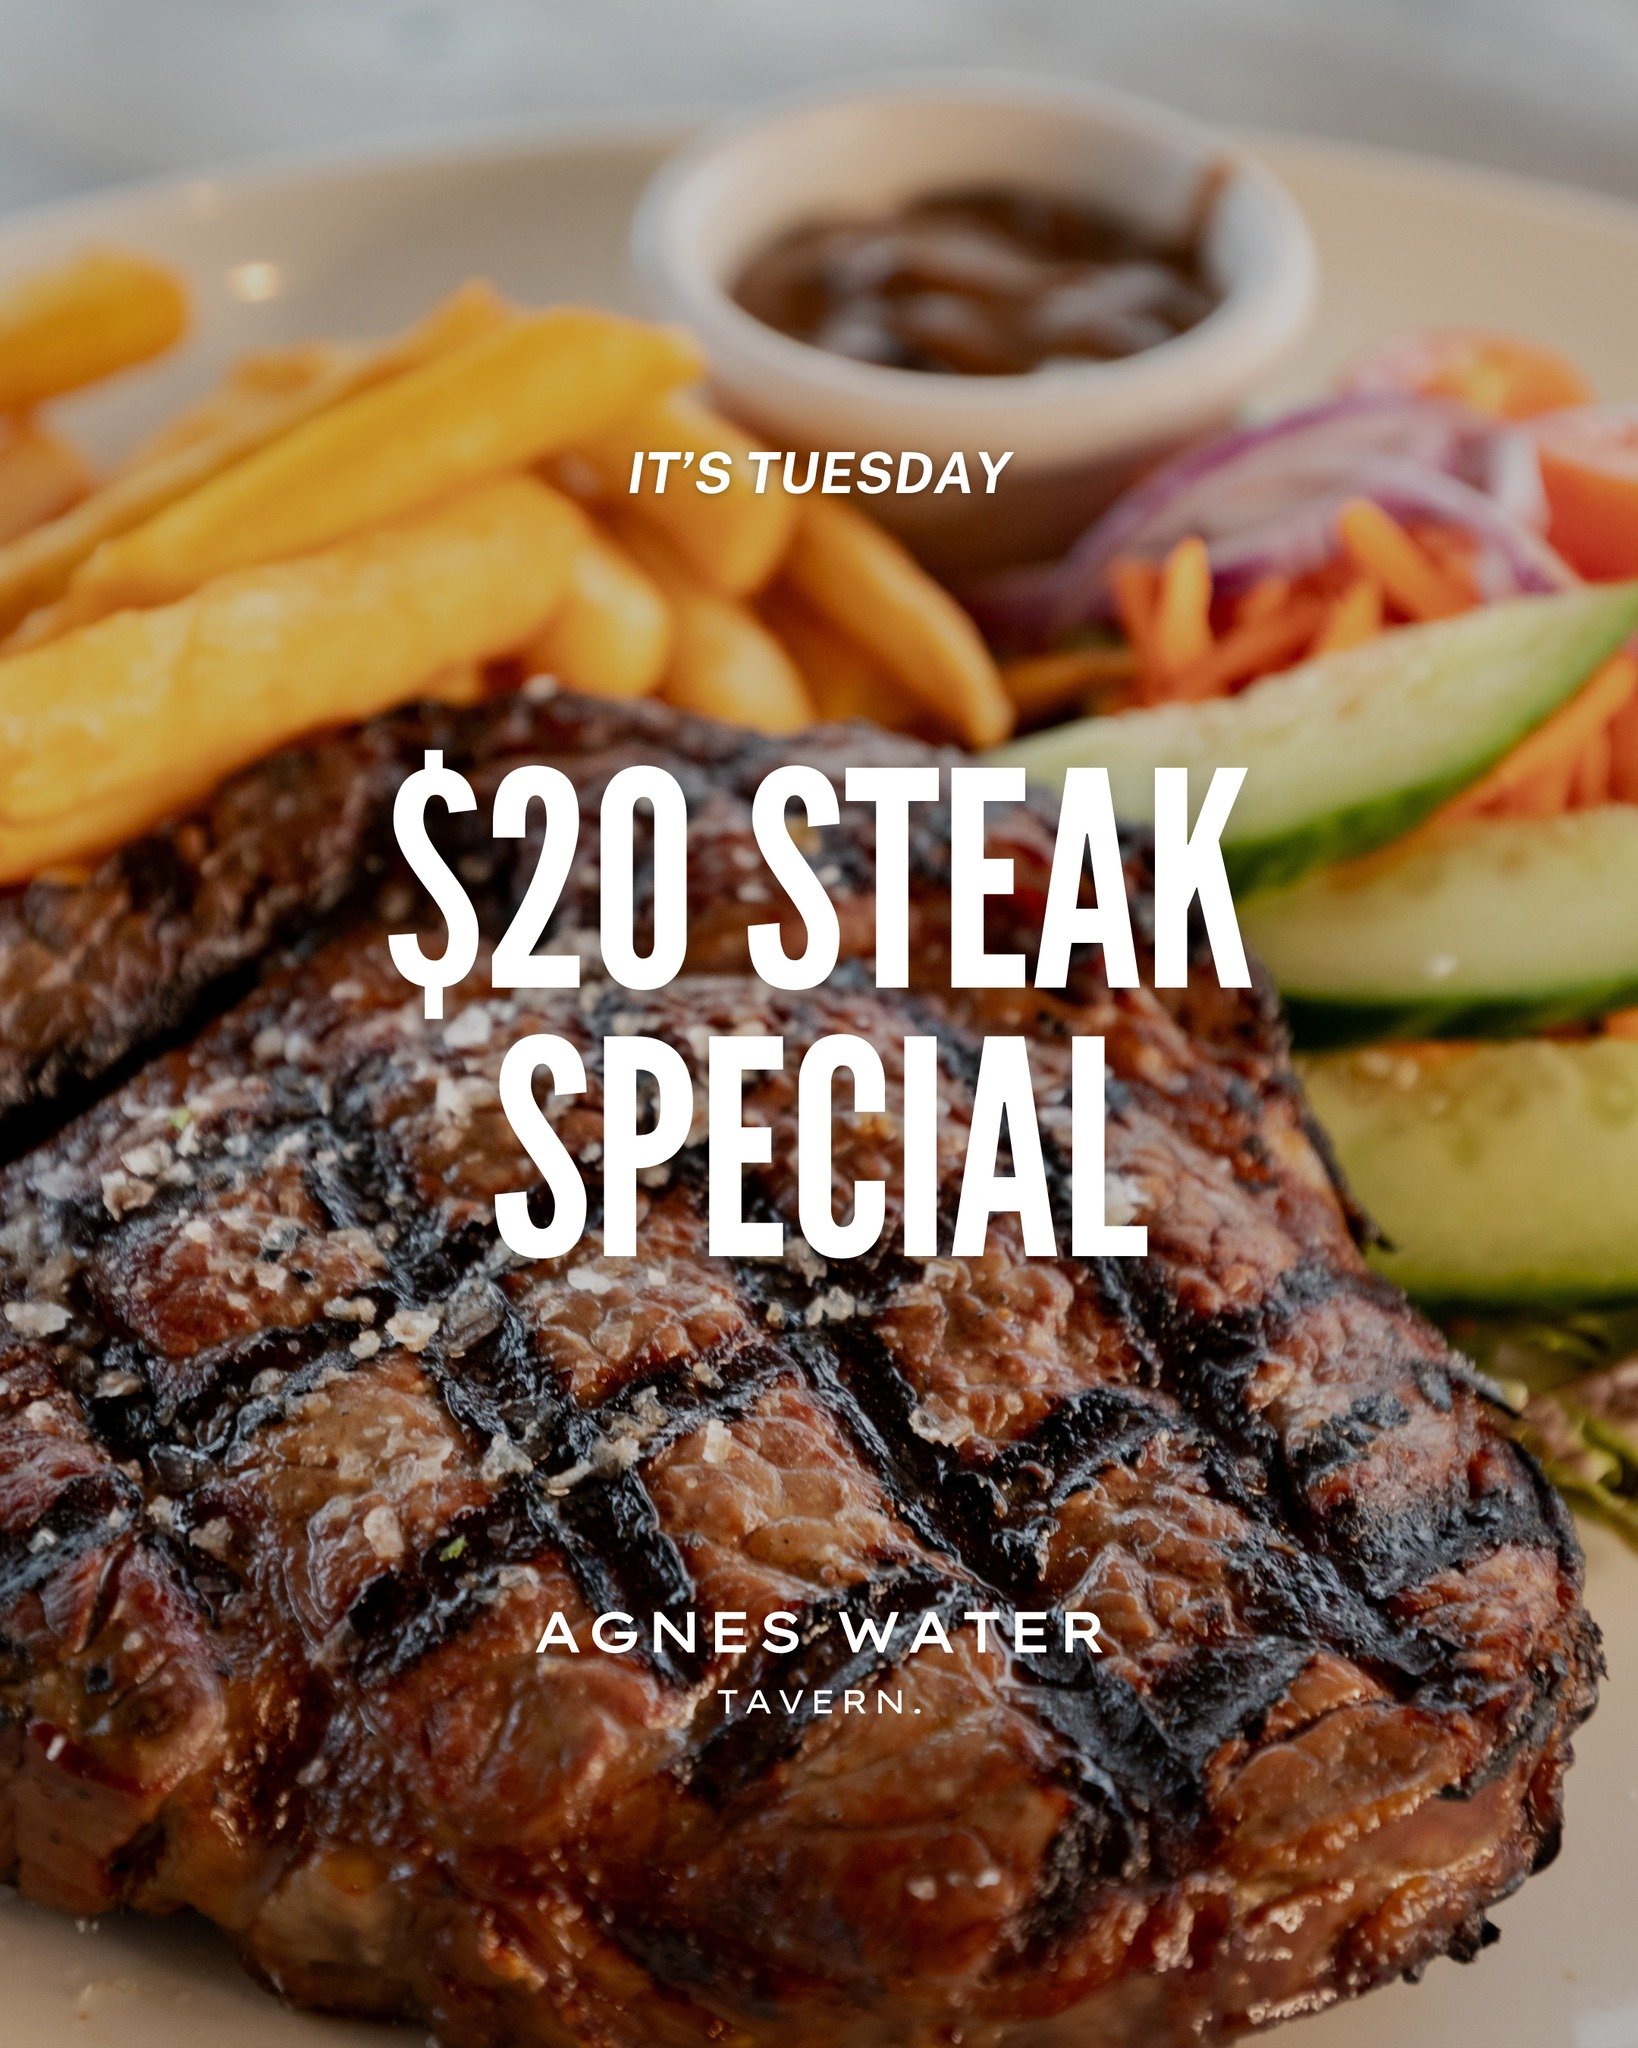 🥩 𝗜𝘁'𝘀 𝗧𝘂𝗲𝘀𝗱𝗮𝘆! $𝟮𝟬 𝗦𝘁𝗲𝗮𝗸 𝗦𝗽𝗲𝗰𝗶𝗮𝗹 𝗧𝗼𝗻𝗶𝗴𝗵𝘁! 🥩

Our popular $𝟐𝟎 𝐒𝐭𝐞𝐚𝐤 𝐒𝐩𝐞𝐜𝐢𝐚𝐥 is back tonight! Enjoy a juicy steak with chips, salad, and your choice of sauce for just $20.

📅 Available every Tuesday unti